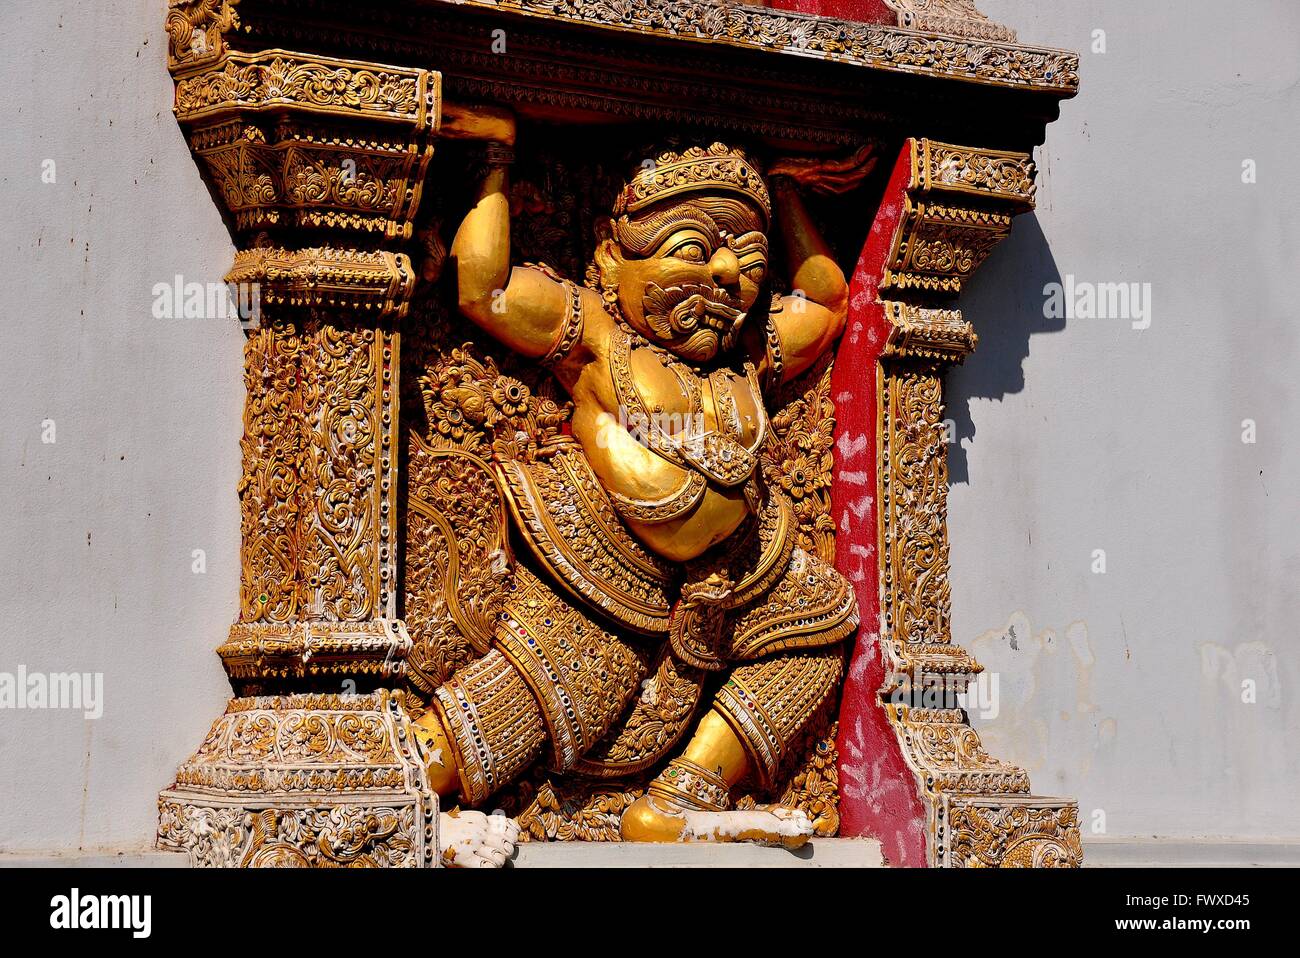 Chiang Mai, Thailand:  Gilded figure of a mythical man holding up a window frame adorns a side wall at Wat Sri Suphan * Stock Photo